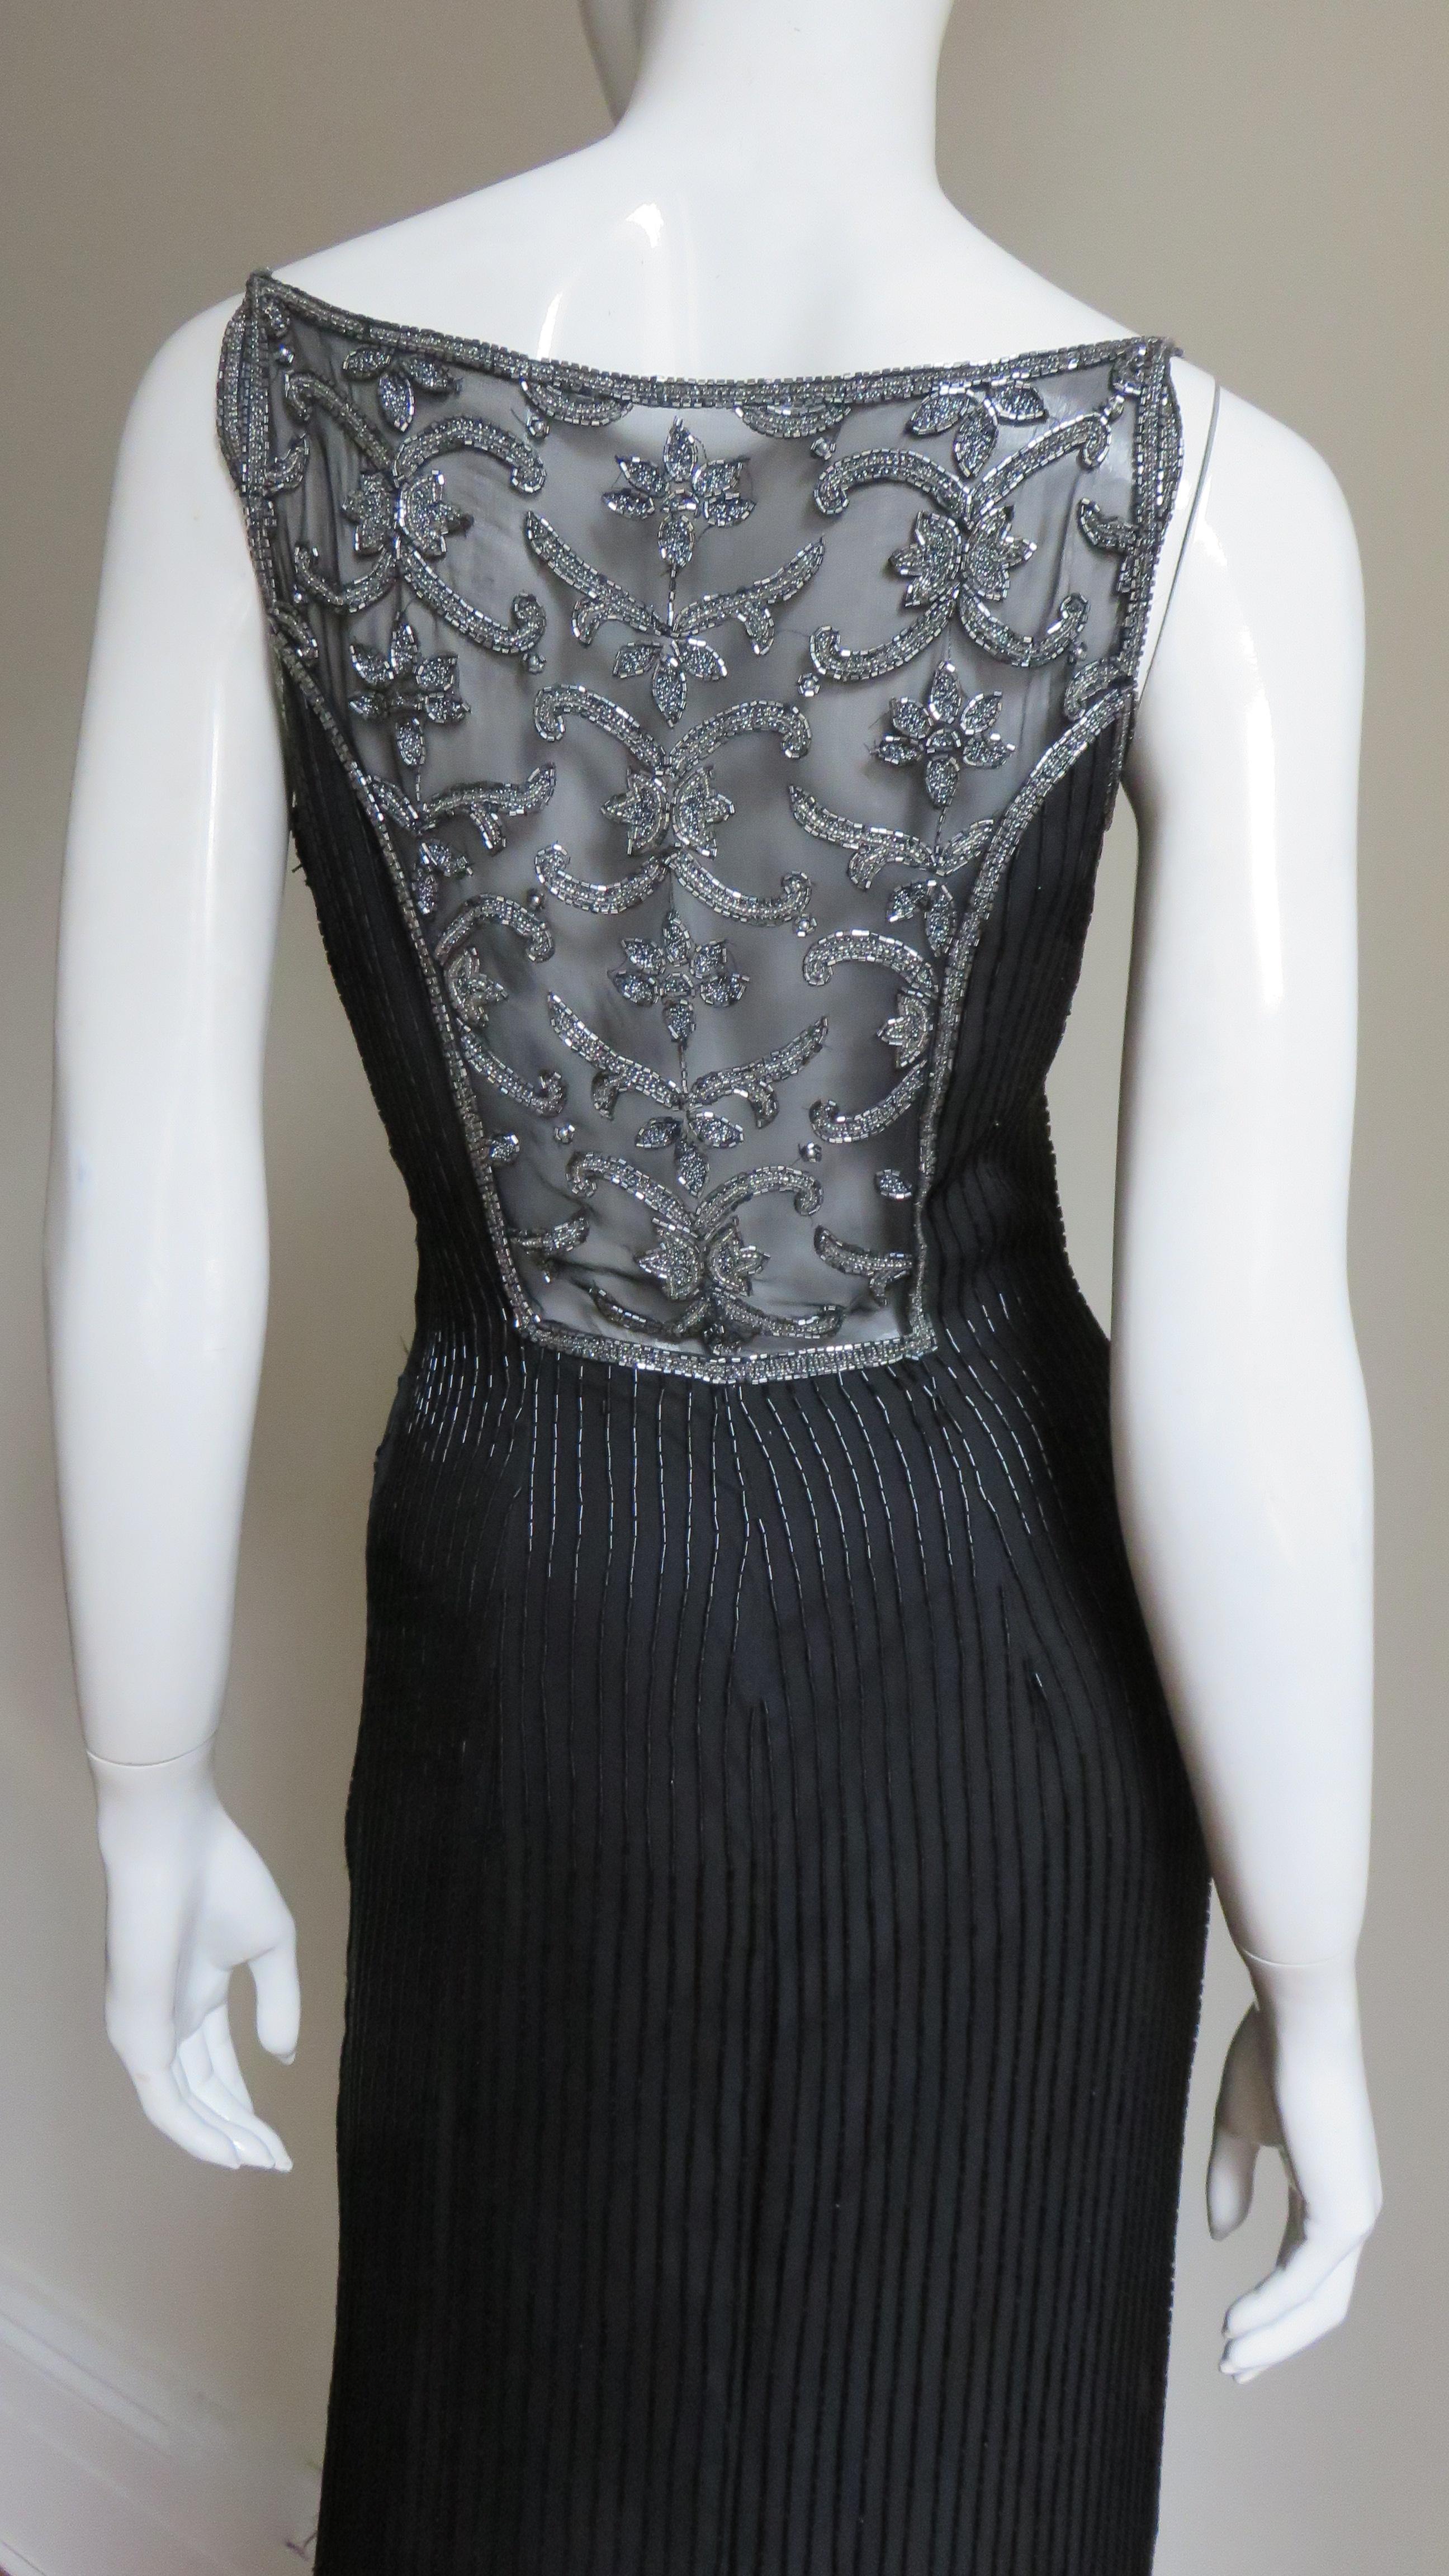 Sonia Rykiel Silk Beaded Gown with Elaborate Sheer Back 1990s For Sale 2